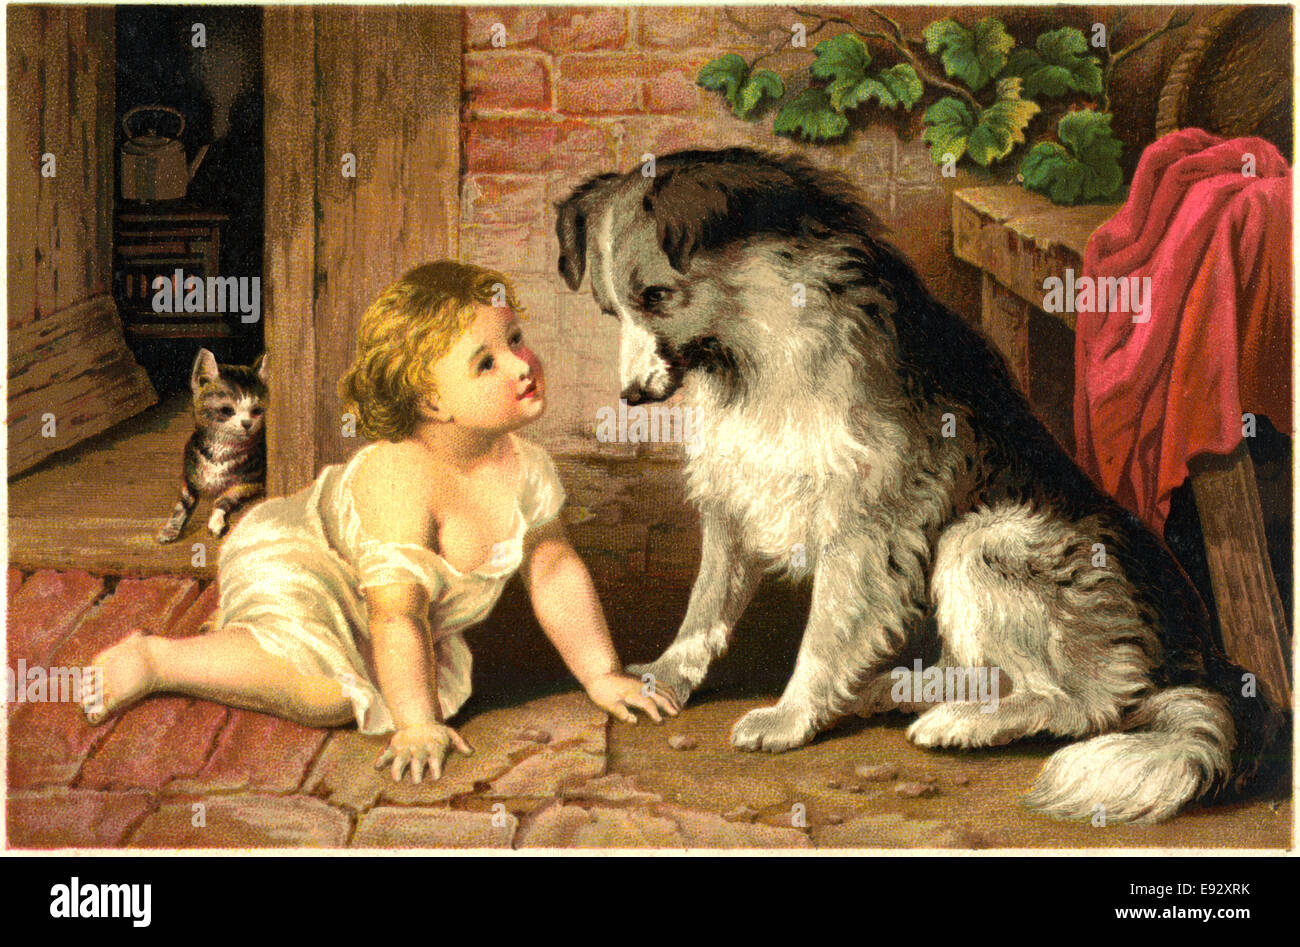 Child and Dog Sitting on Floor, 'Can't you Talk', Dr. D. Jayne's Tonic Vermifuge, Trade Card, circa 1890's Stock Photo